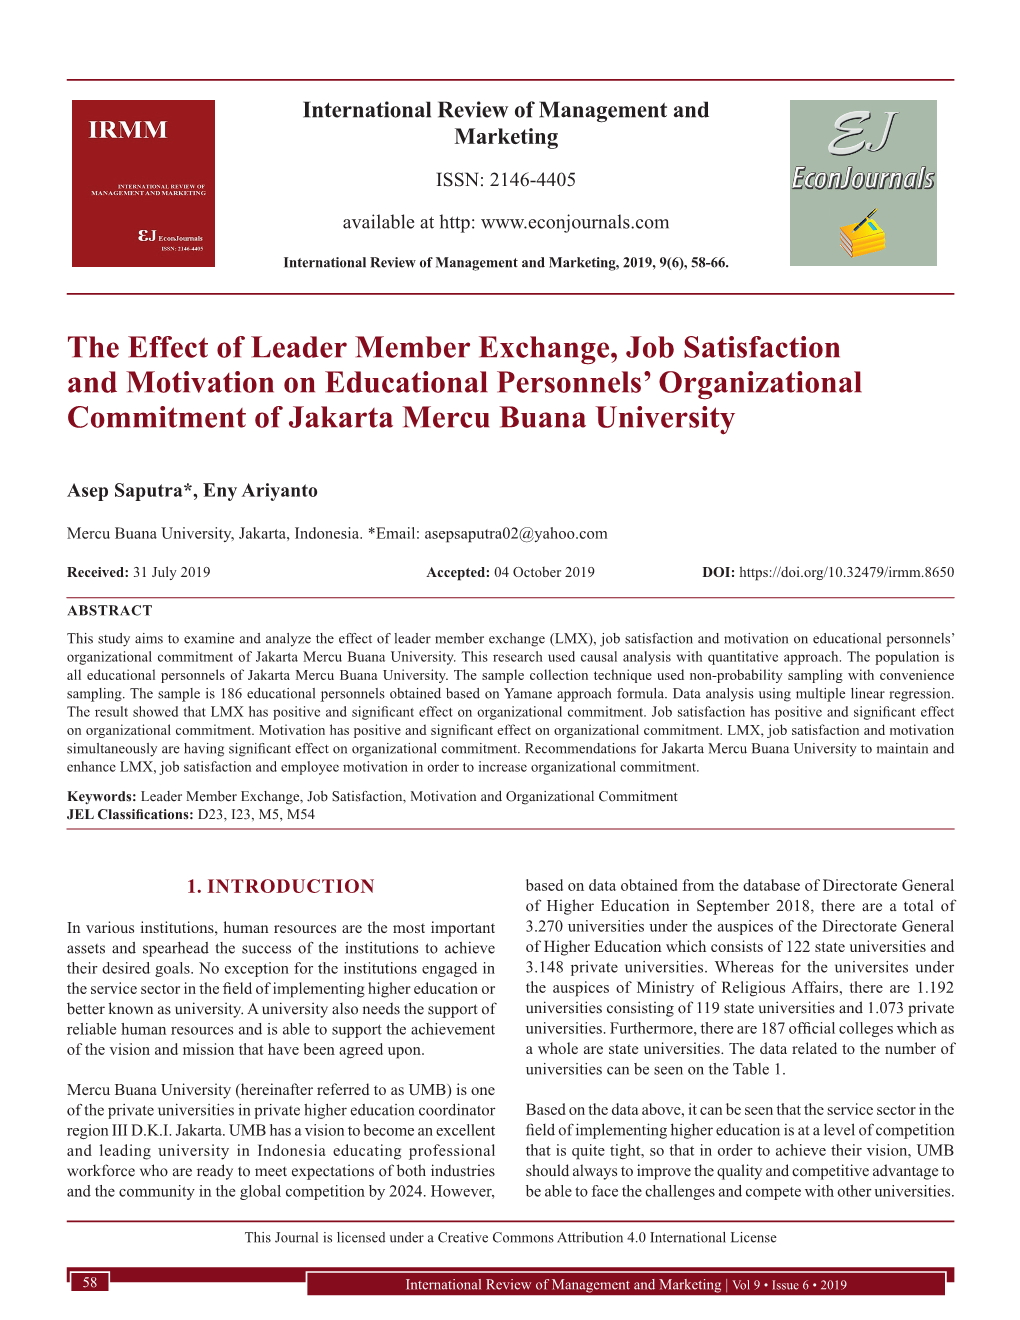 The Effect of Leader Member Exchange, Job Satisfaction and Motivation on Educational Personnels’ Organizational Commitment of Jakarta Mercu Buana University